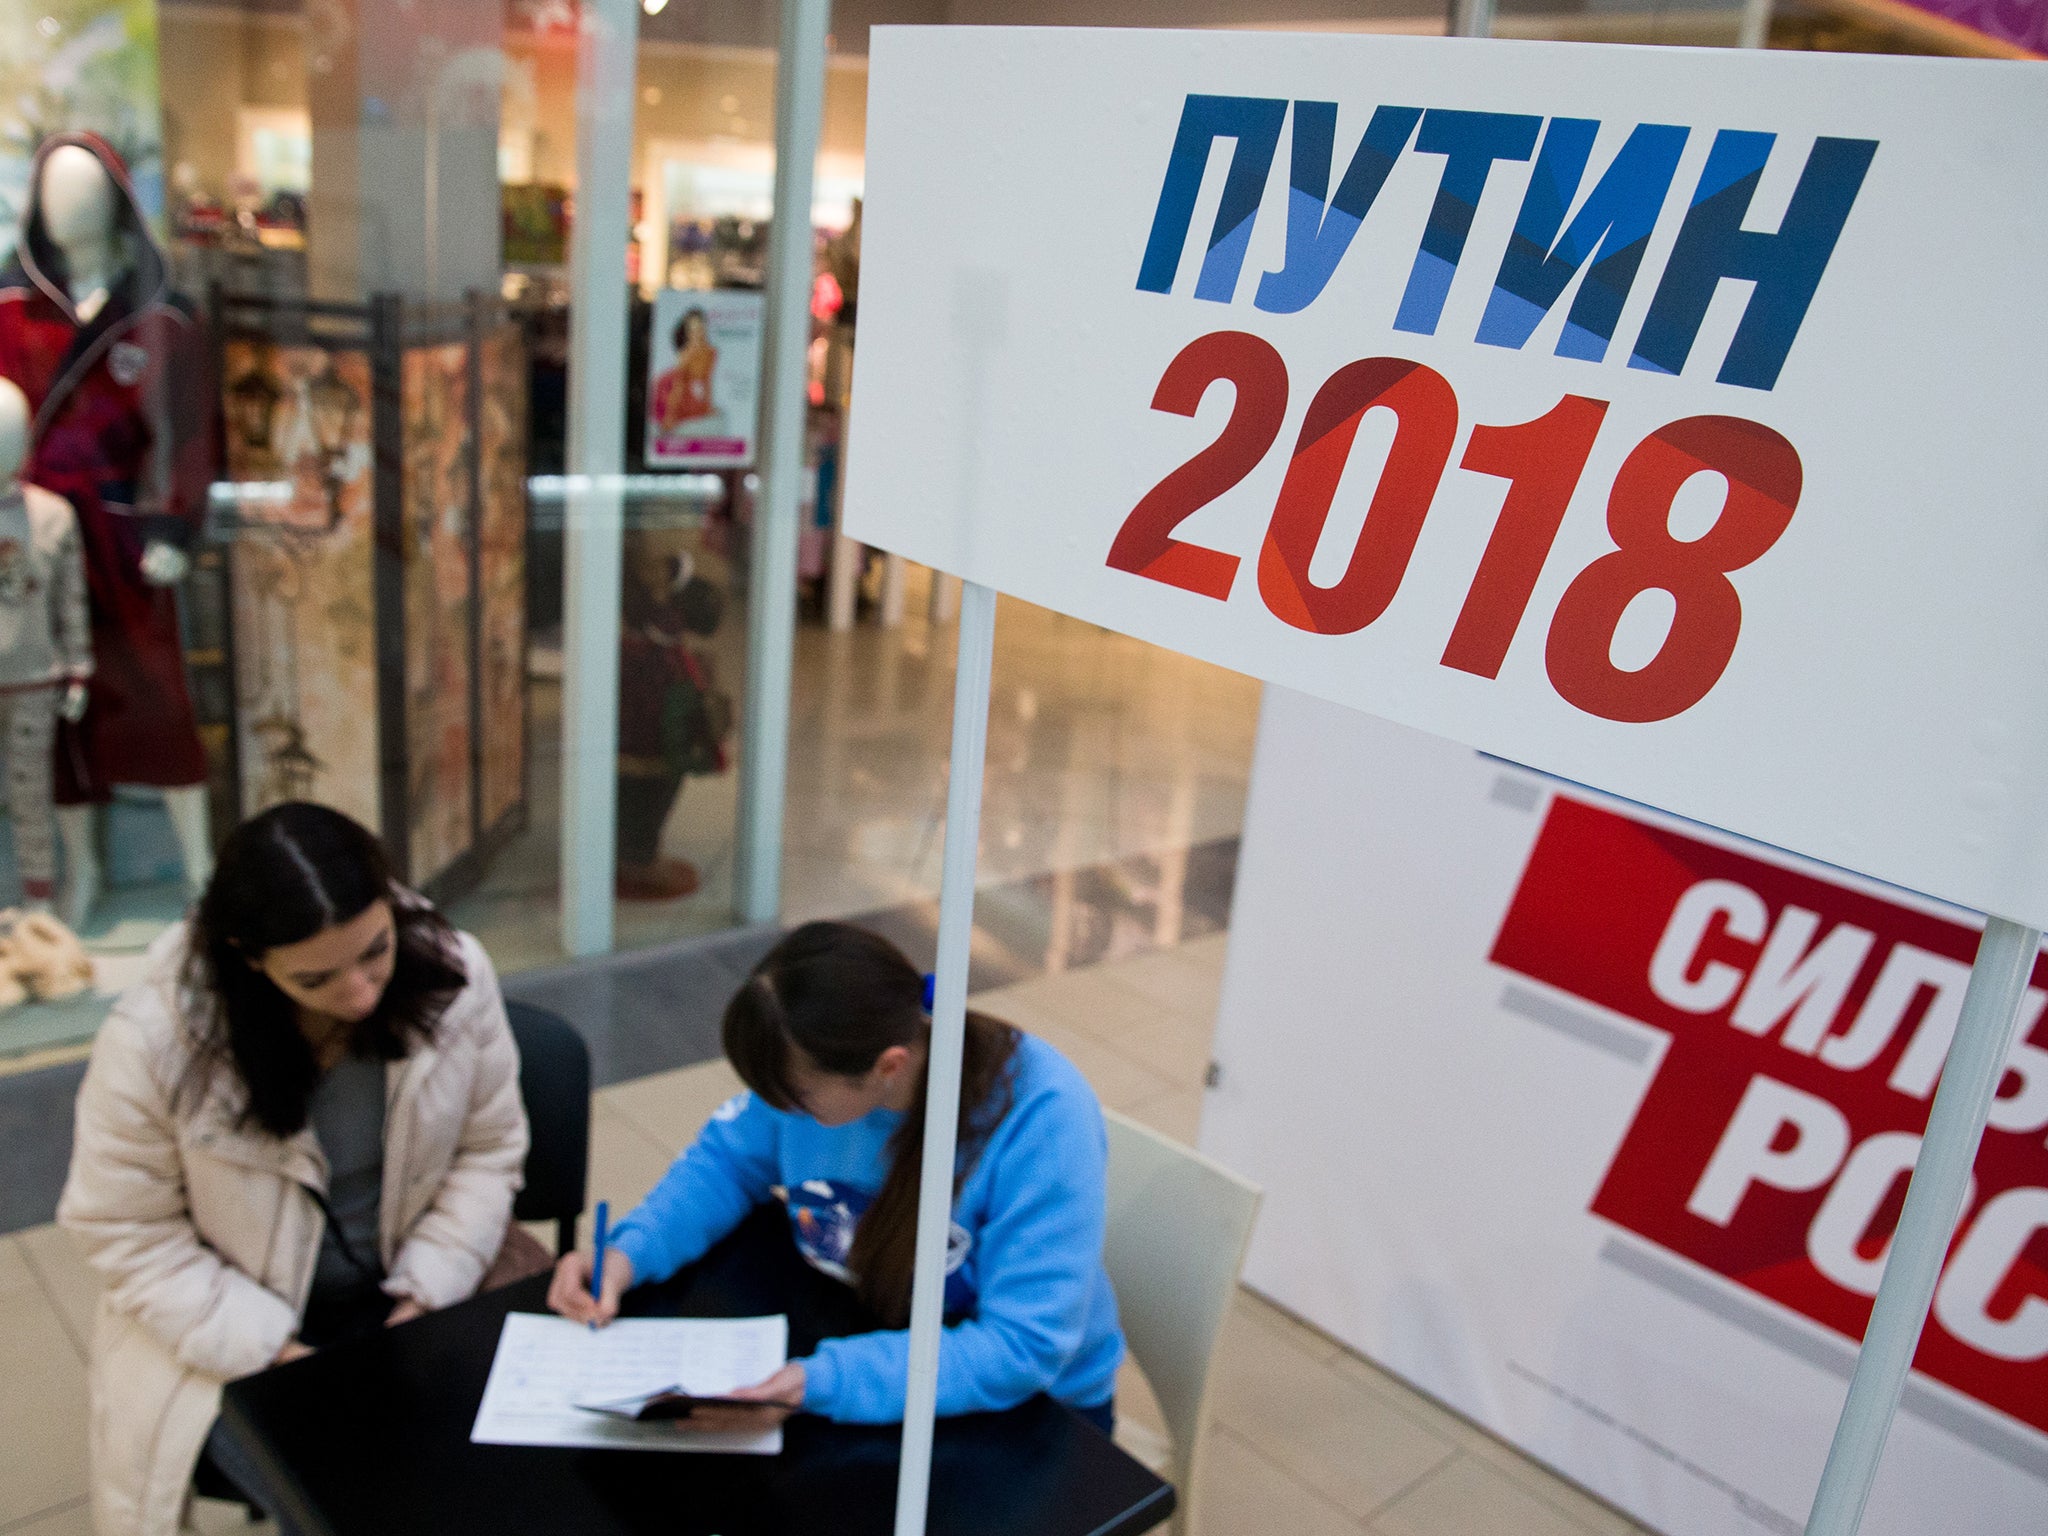 Collecting signatures to support Vladimir Putin’s 2018 Russian presidential election. The sign reads 'Putin 2018'